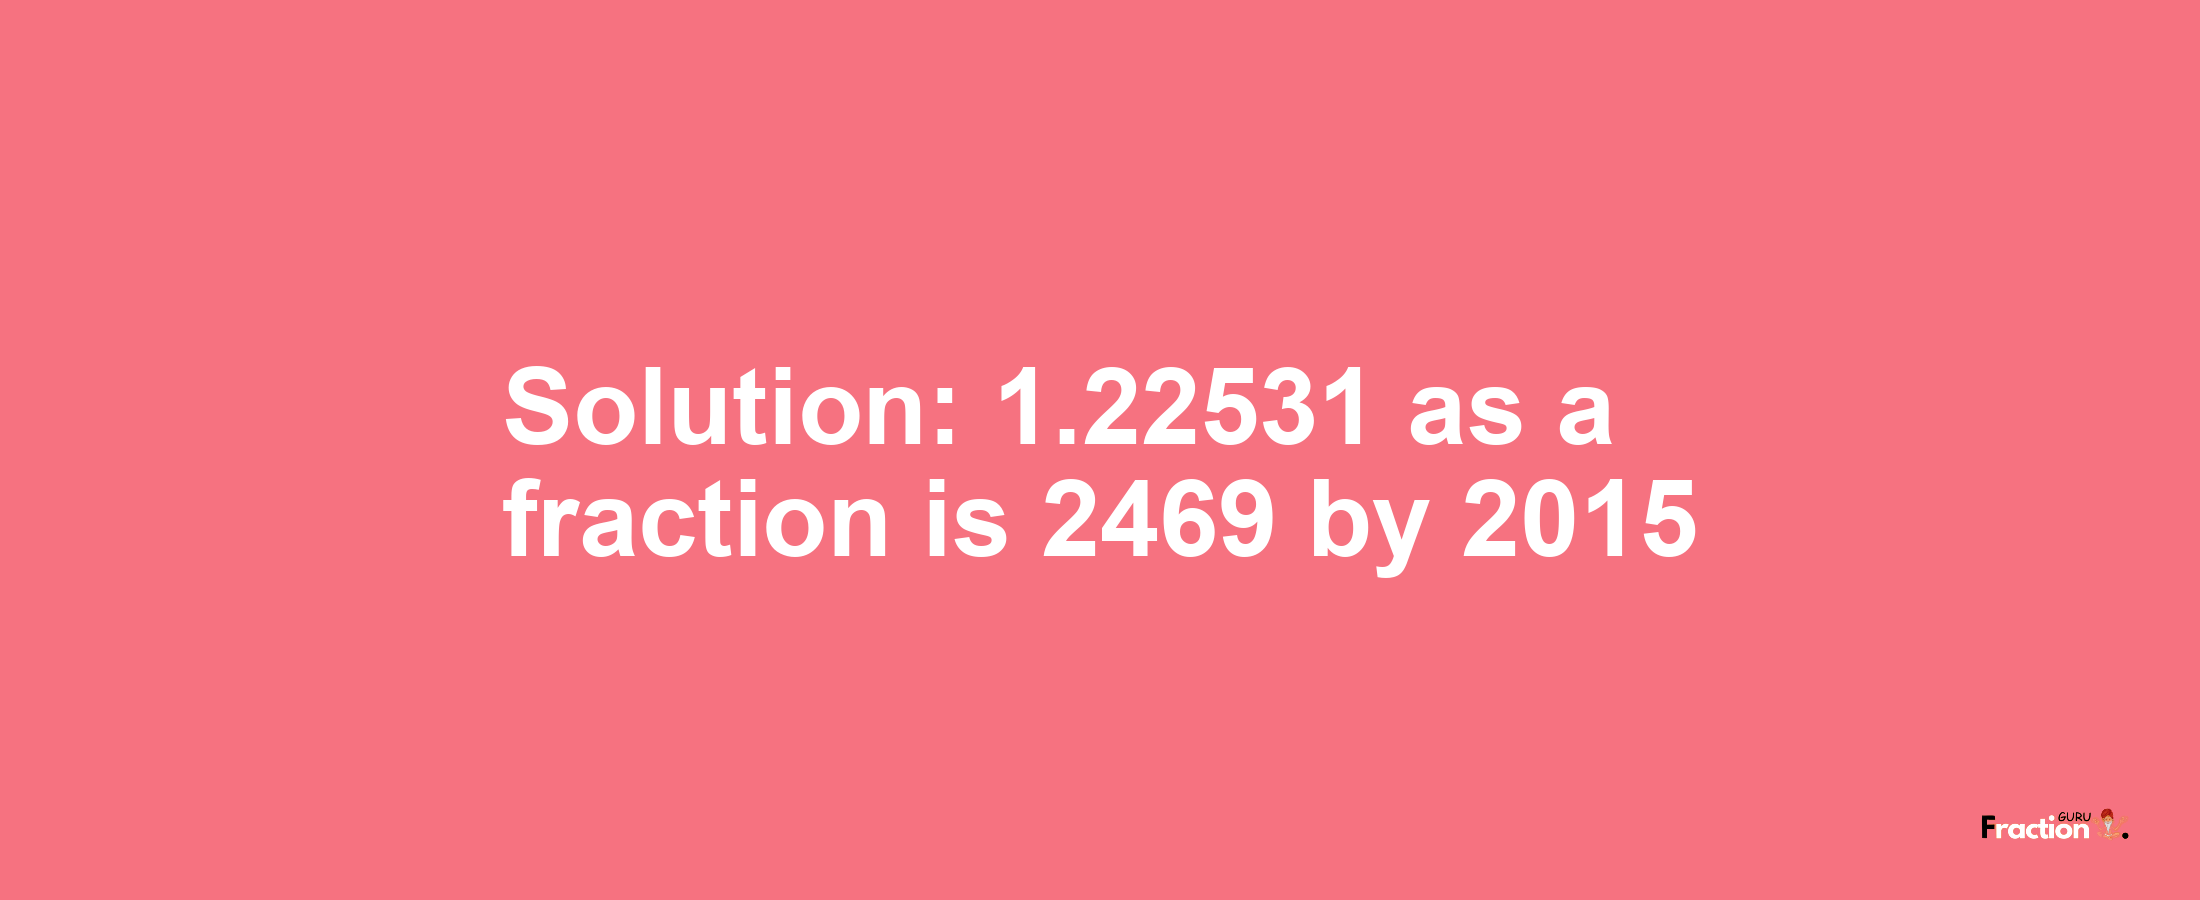 Solution:1.22531 as a fraction is 2469/2015